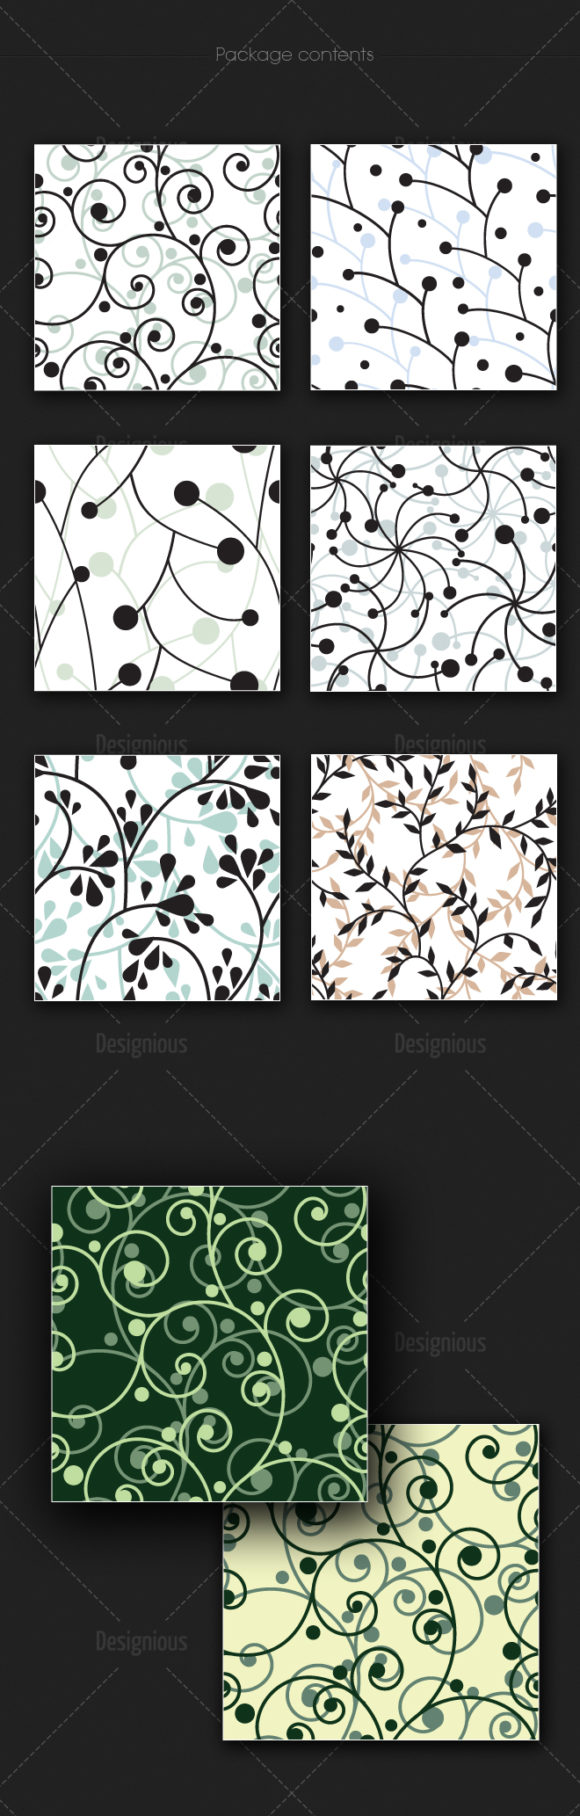 Seamless Patterns Vector Pack 176 2